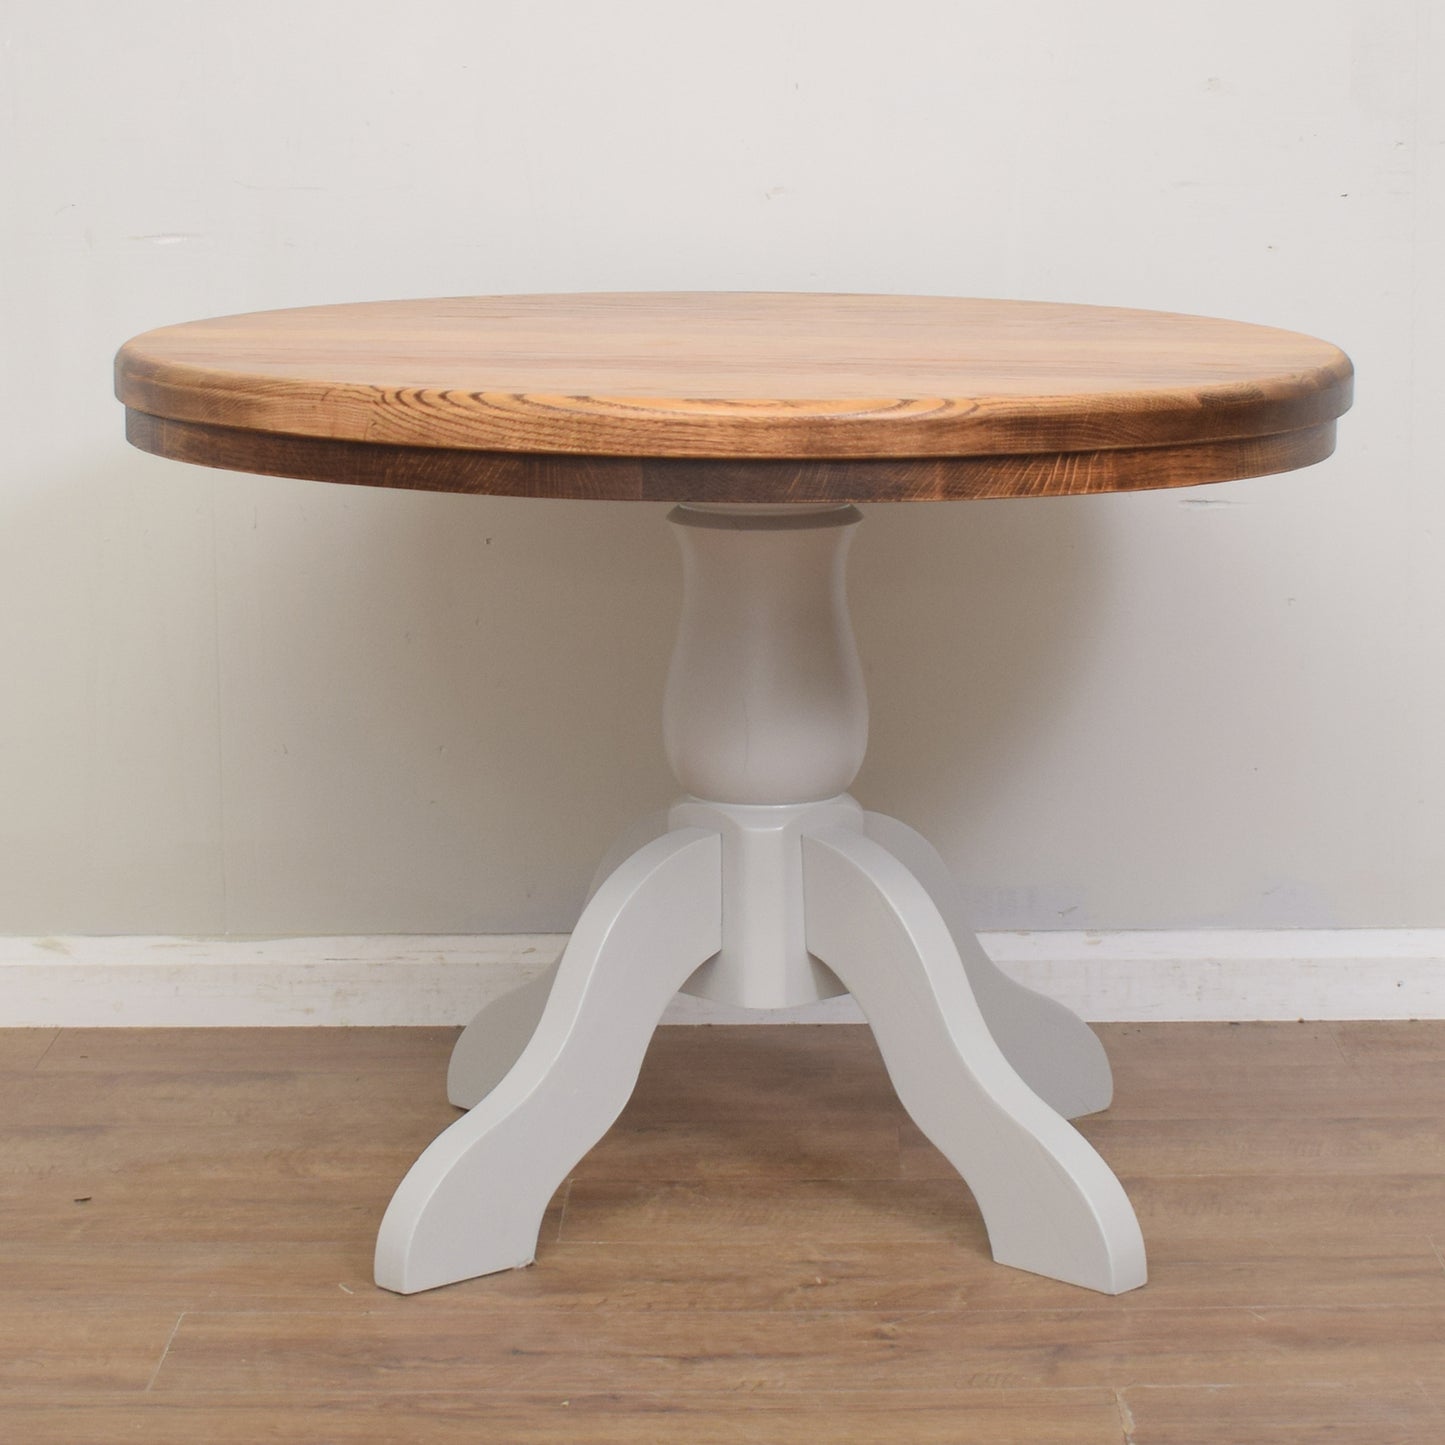 Solid Oak Round Table & Four Chairs